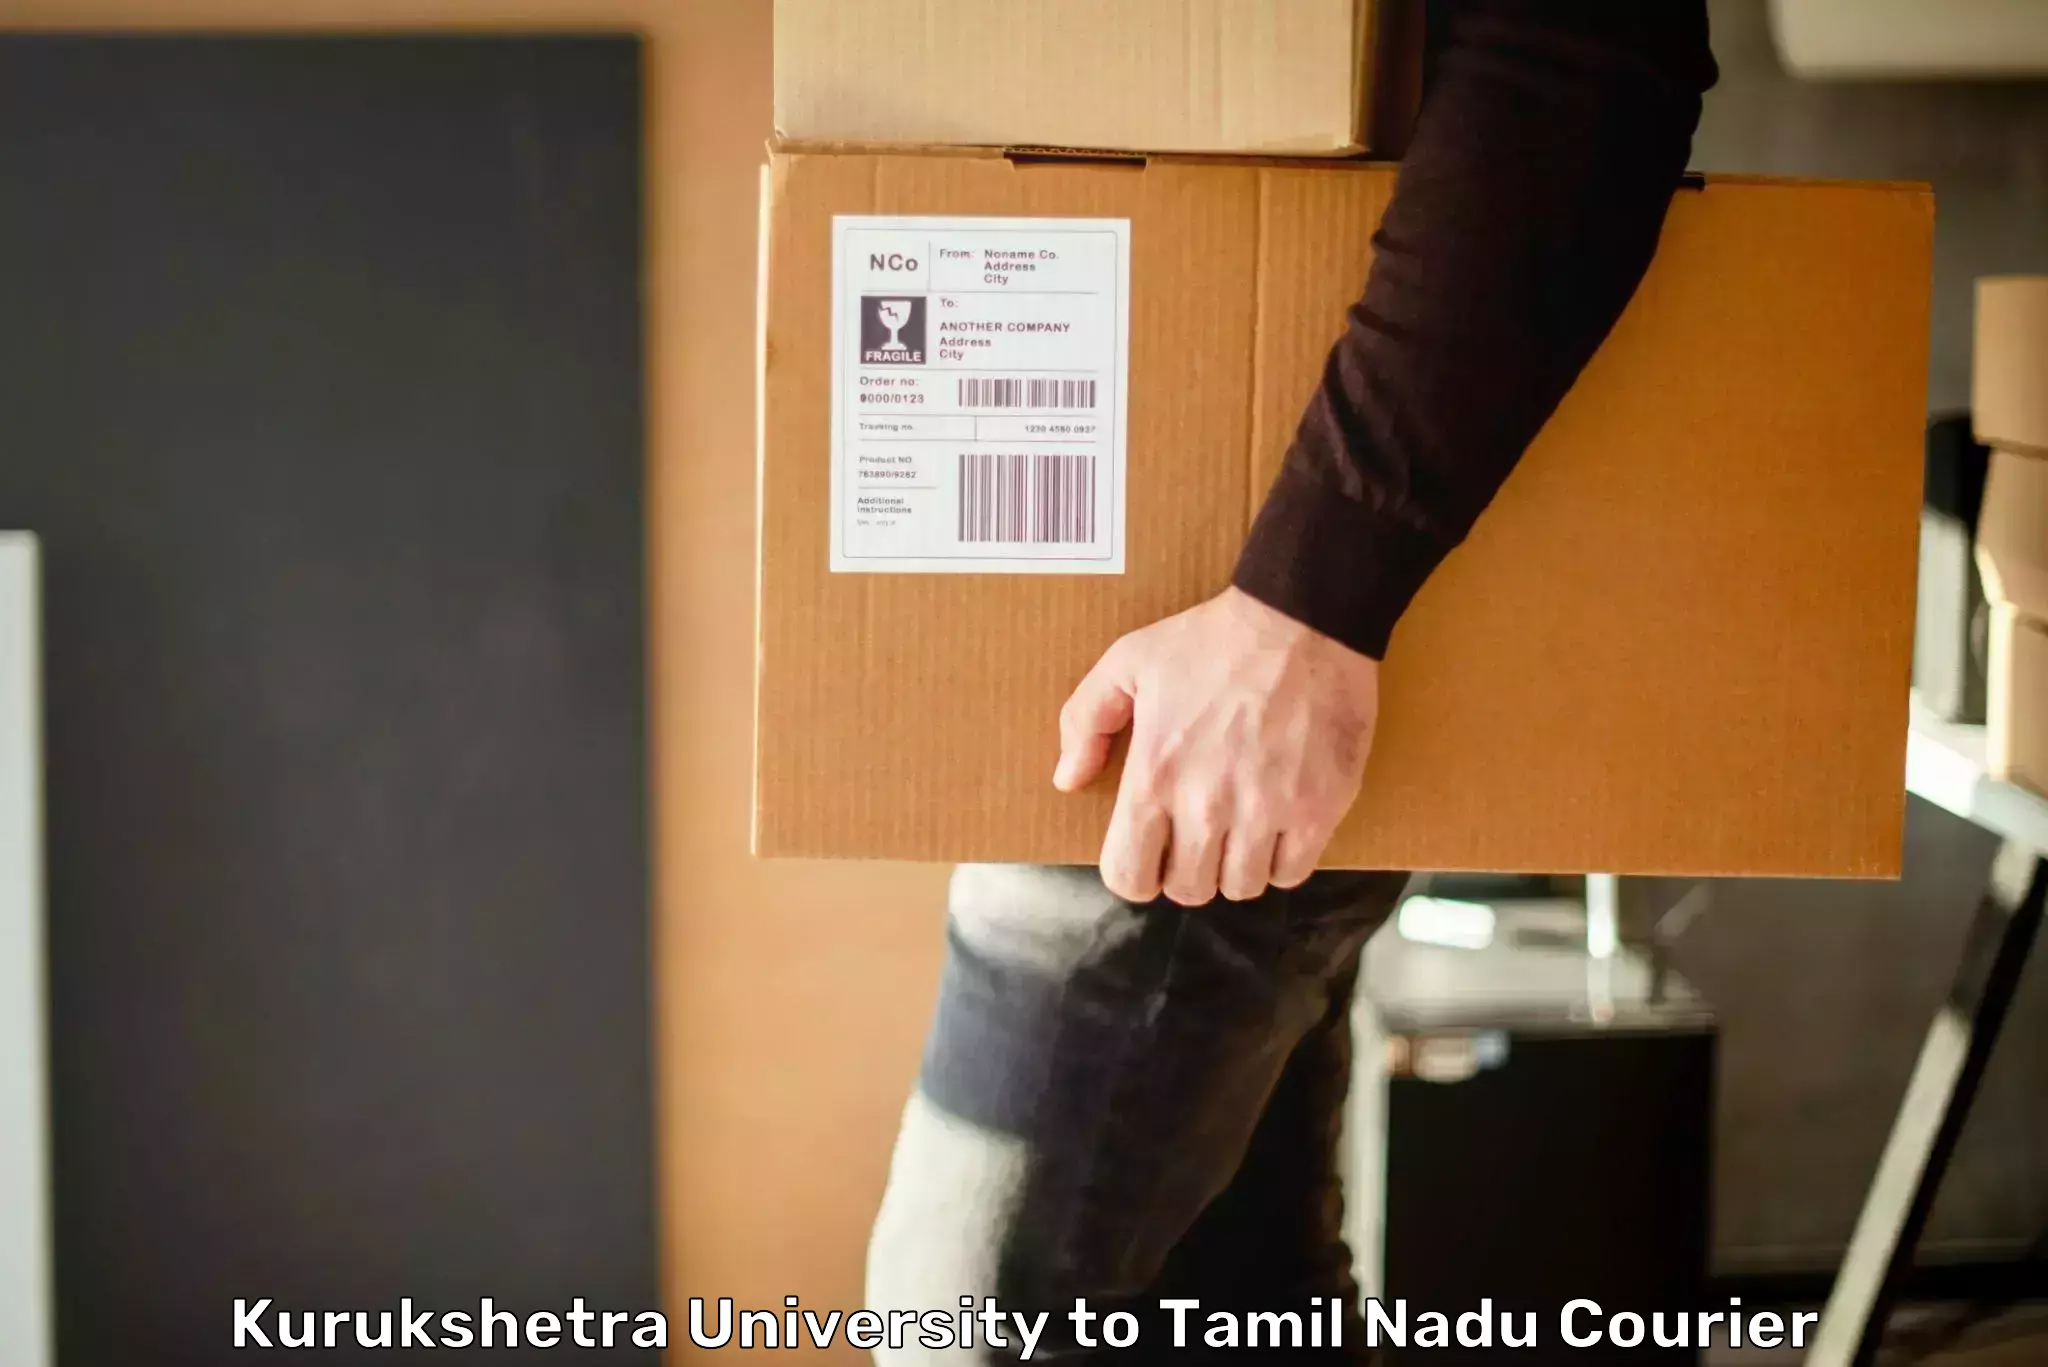 Large package courier Kurukshetra University to Meenakshi Academy of Higher Education and Research Chennai